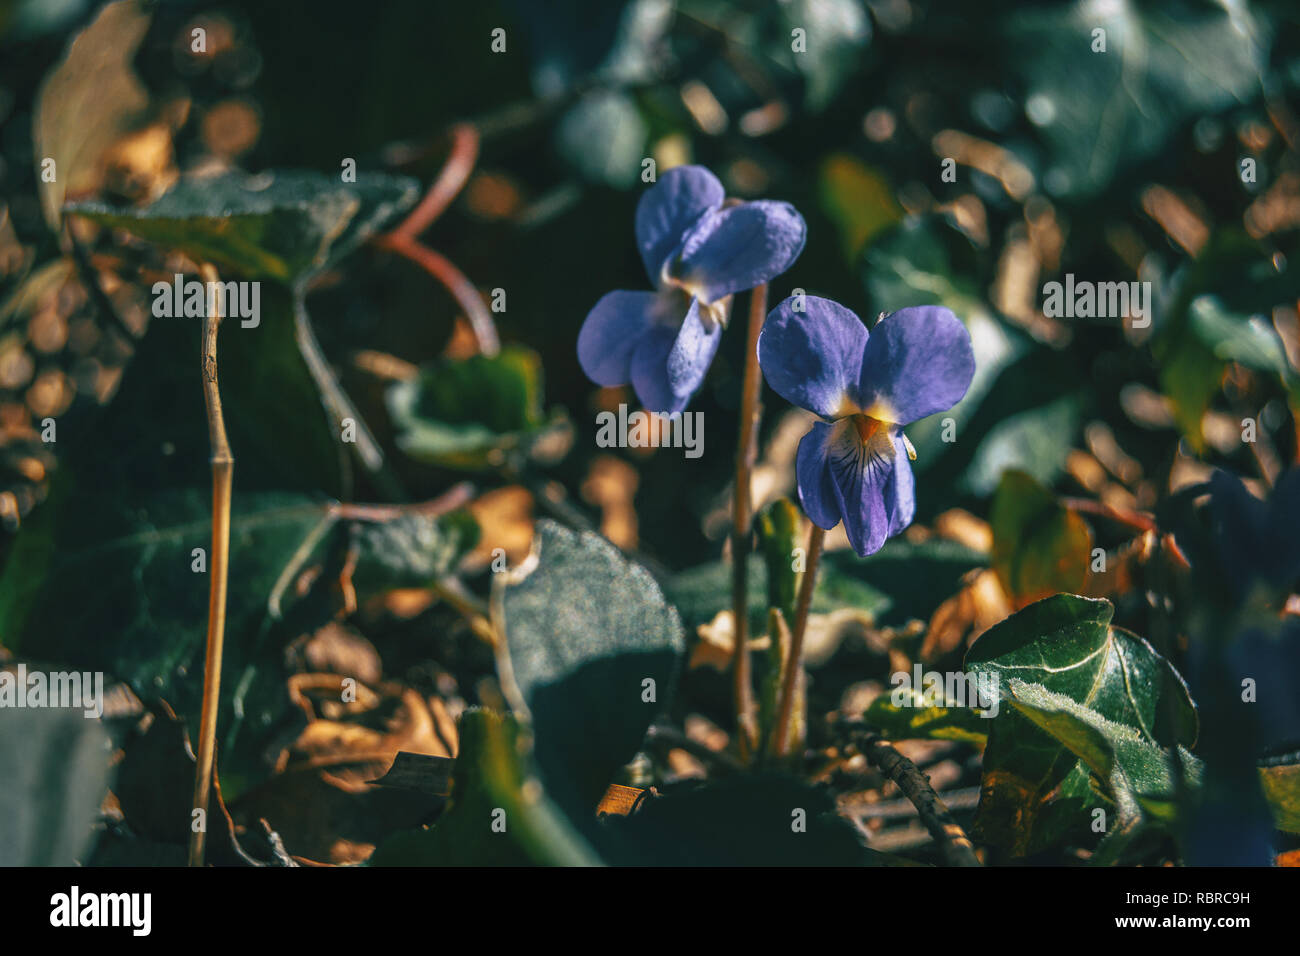 Close-up of a pair of viola alba purple flowers growing in the ground of a forest Stock Photo